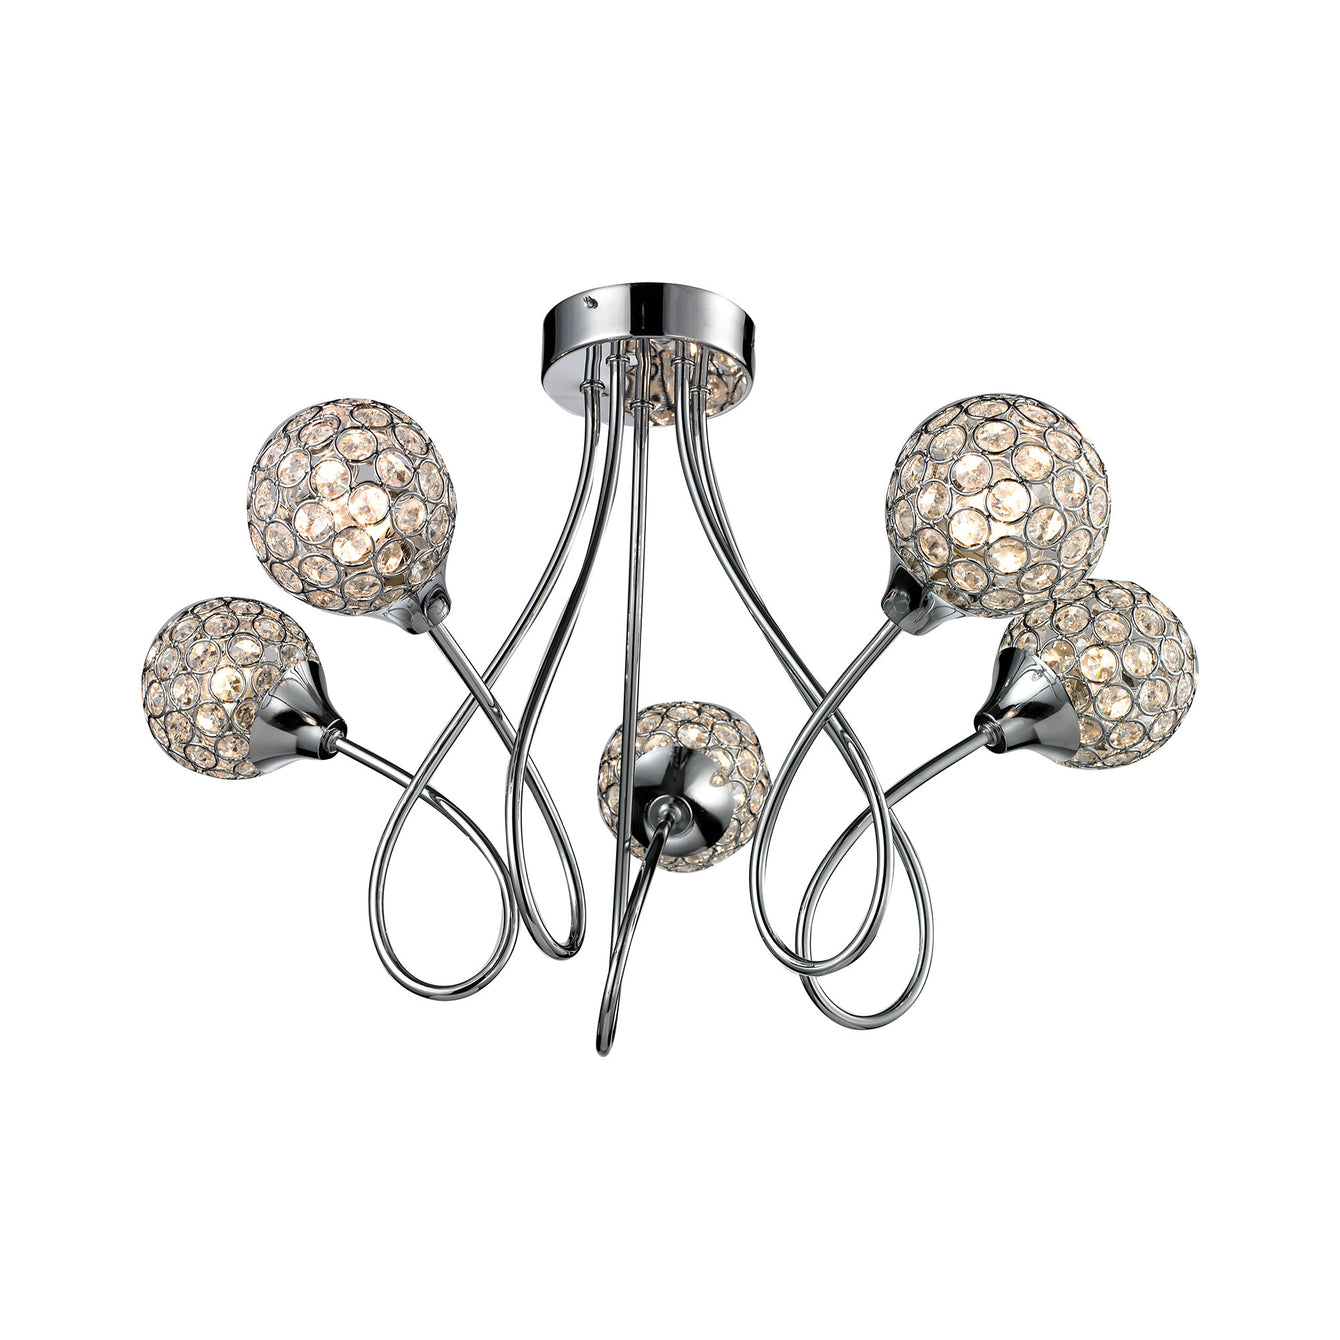 Osterley 4, 5, 6 and 6 plus 6 Arm Pendant LED Light - Buy It Better 6 Arm